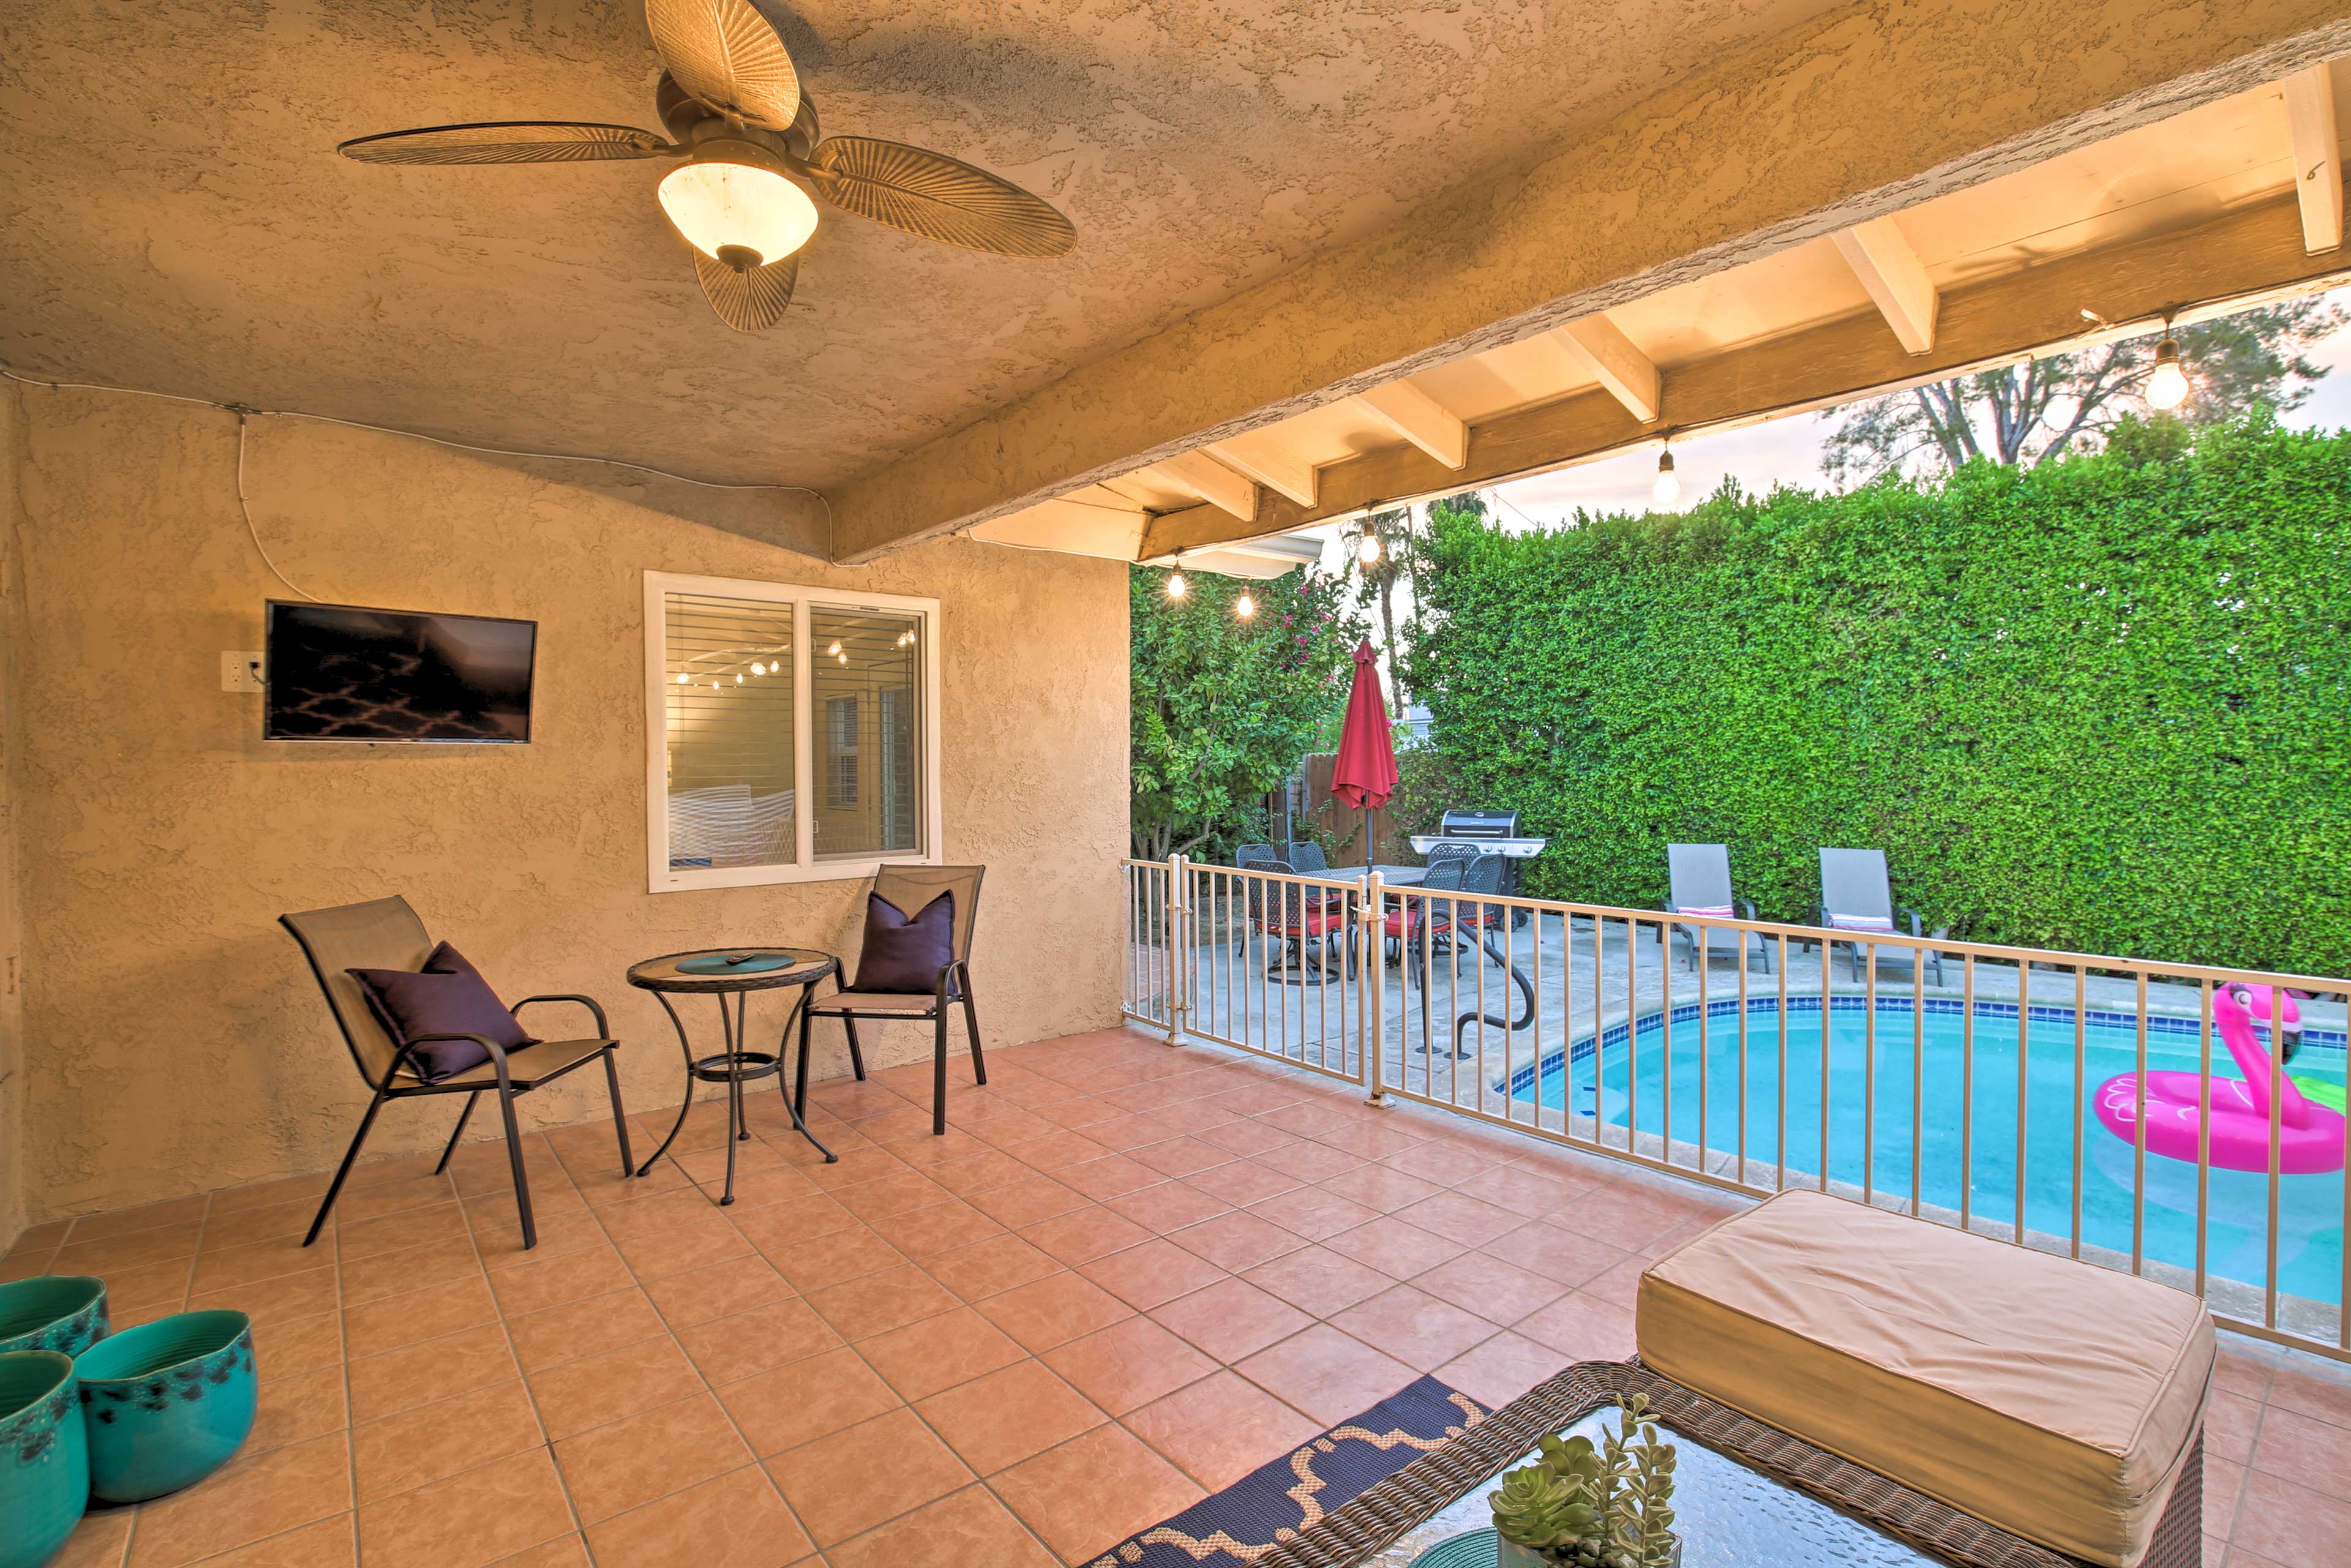 The vacation rental features a furnished patio with an outdoor flat-screen TV.